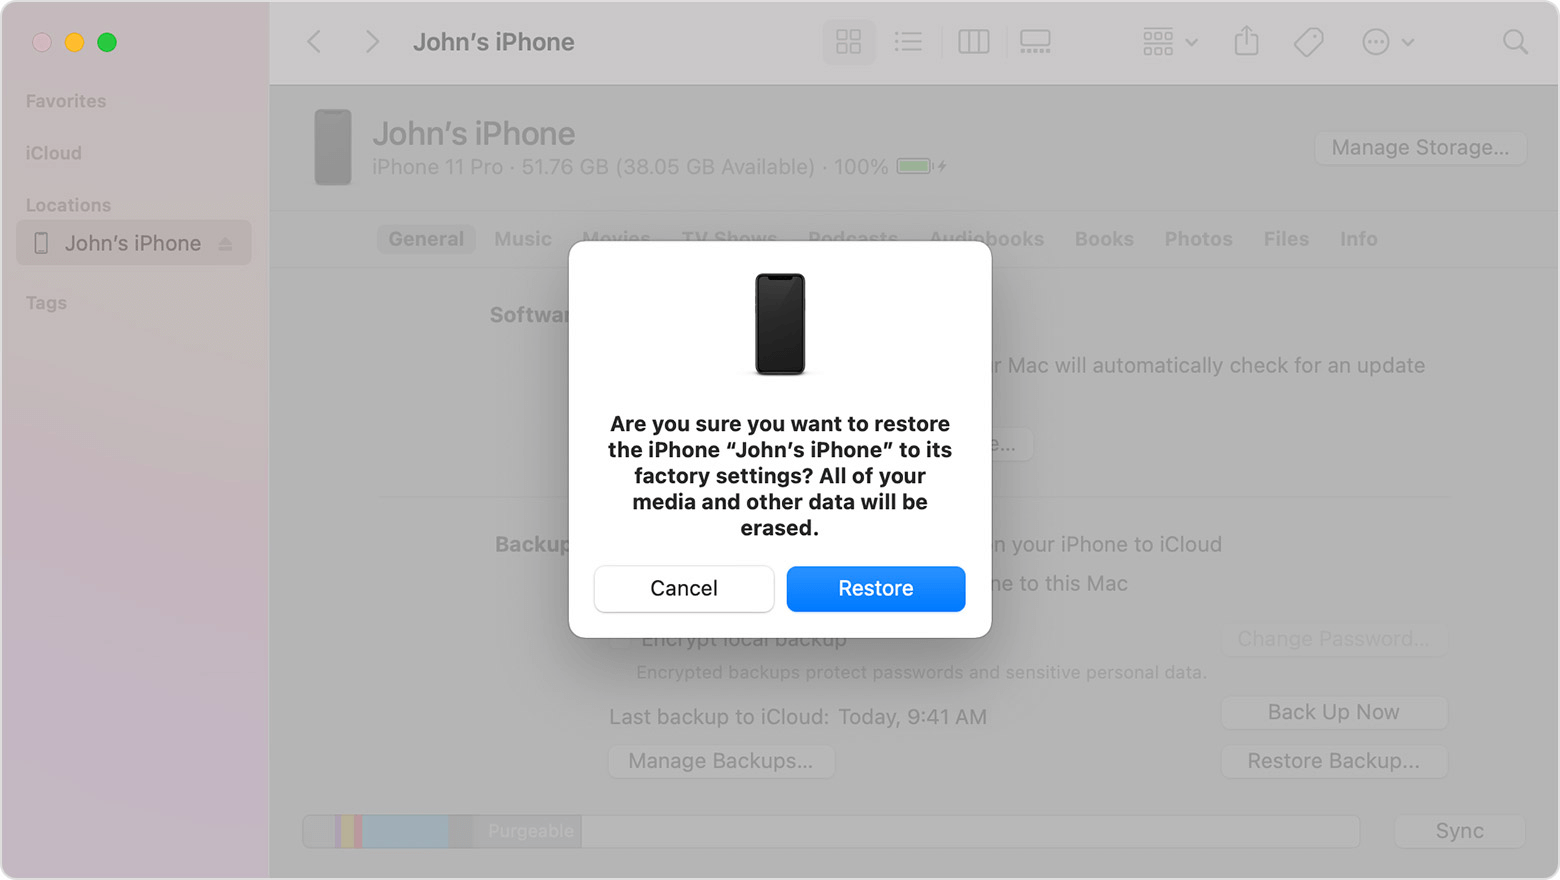 confirm to restore iphone from itunes